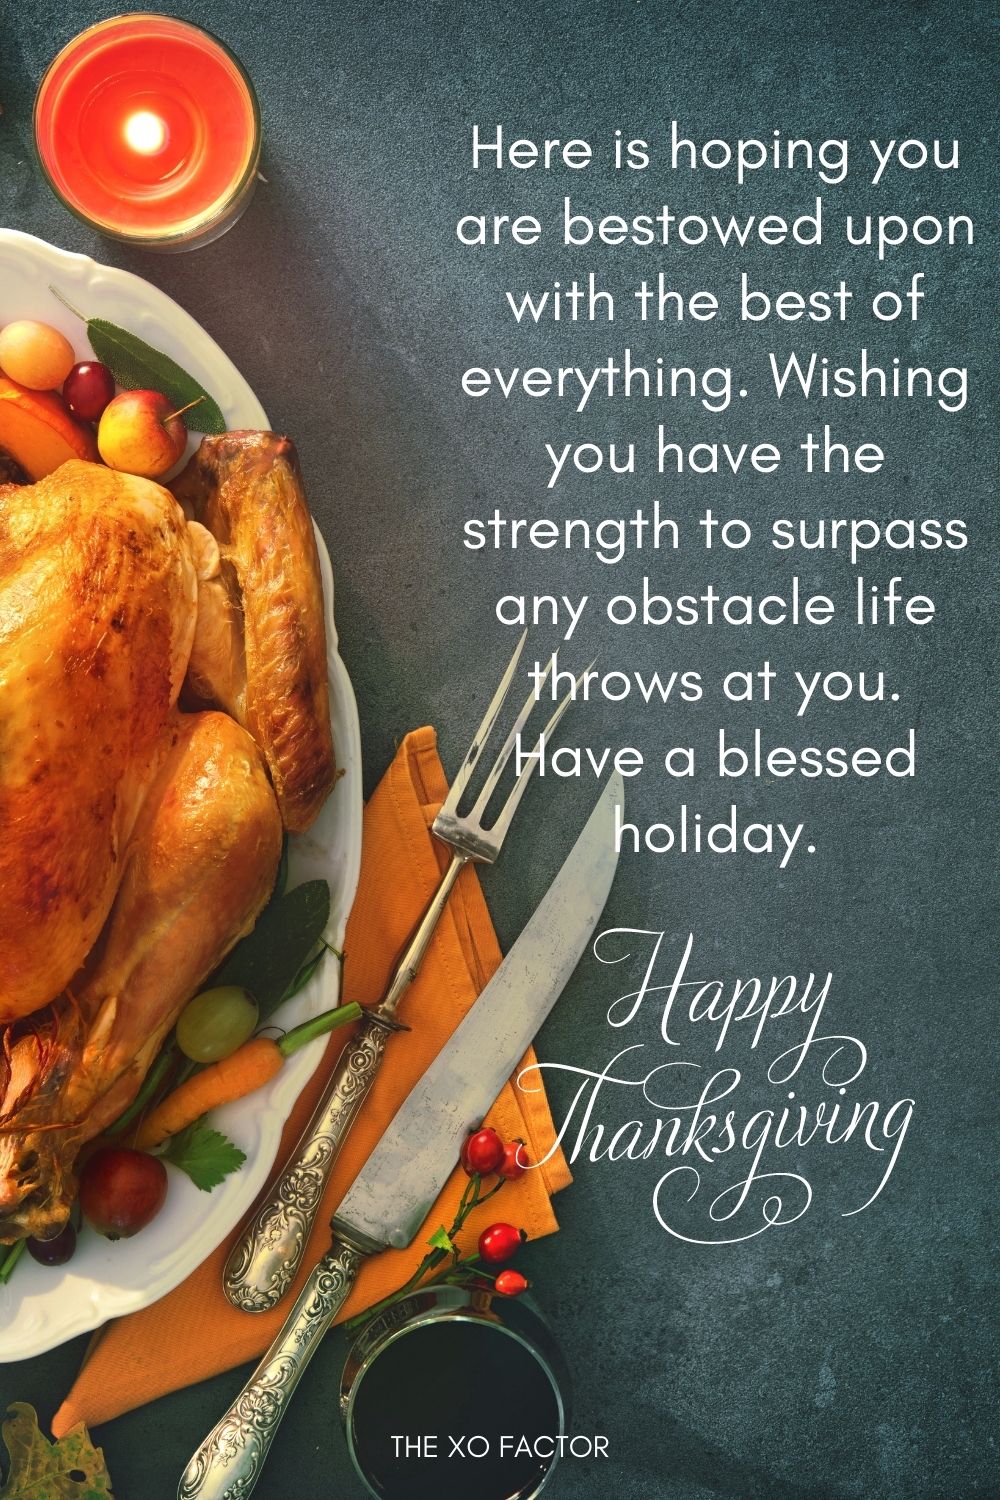 Here is hoping you are bestowed upon with the best of everything. Wishing you have the strength to surpass any obstacle life throws at you. Have a blessed holiday.